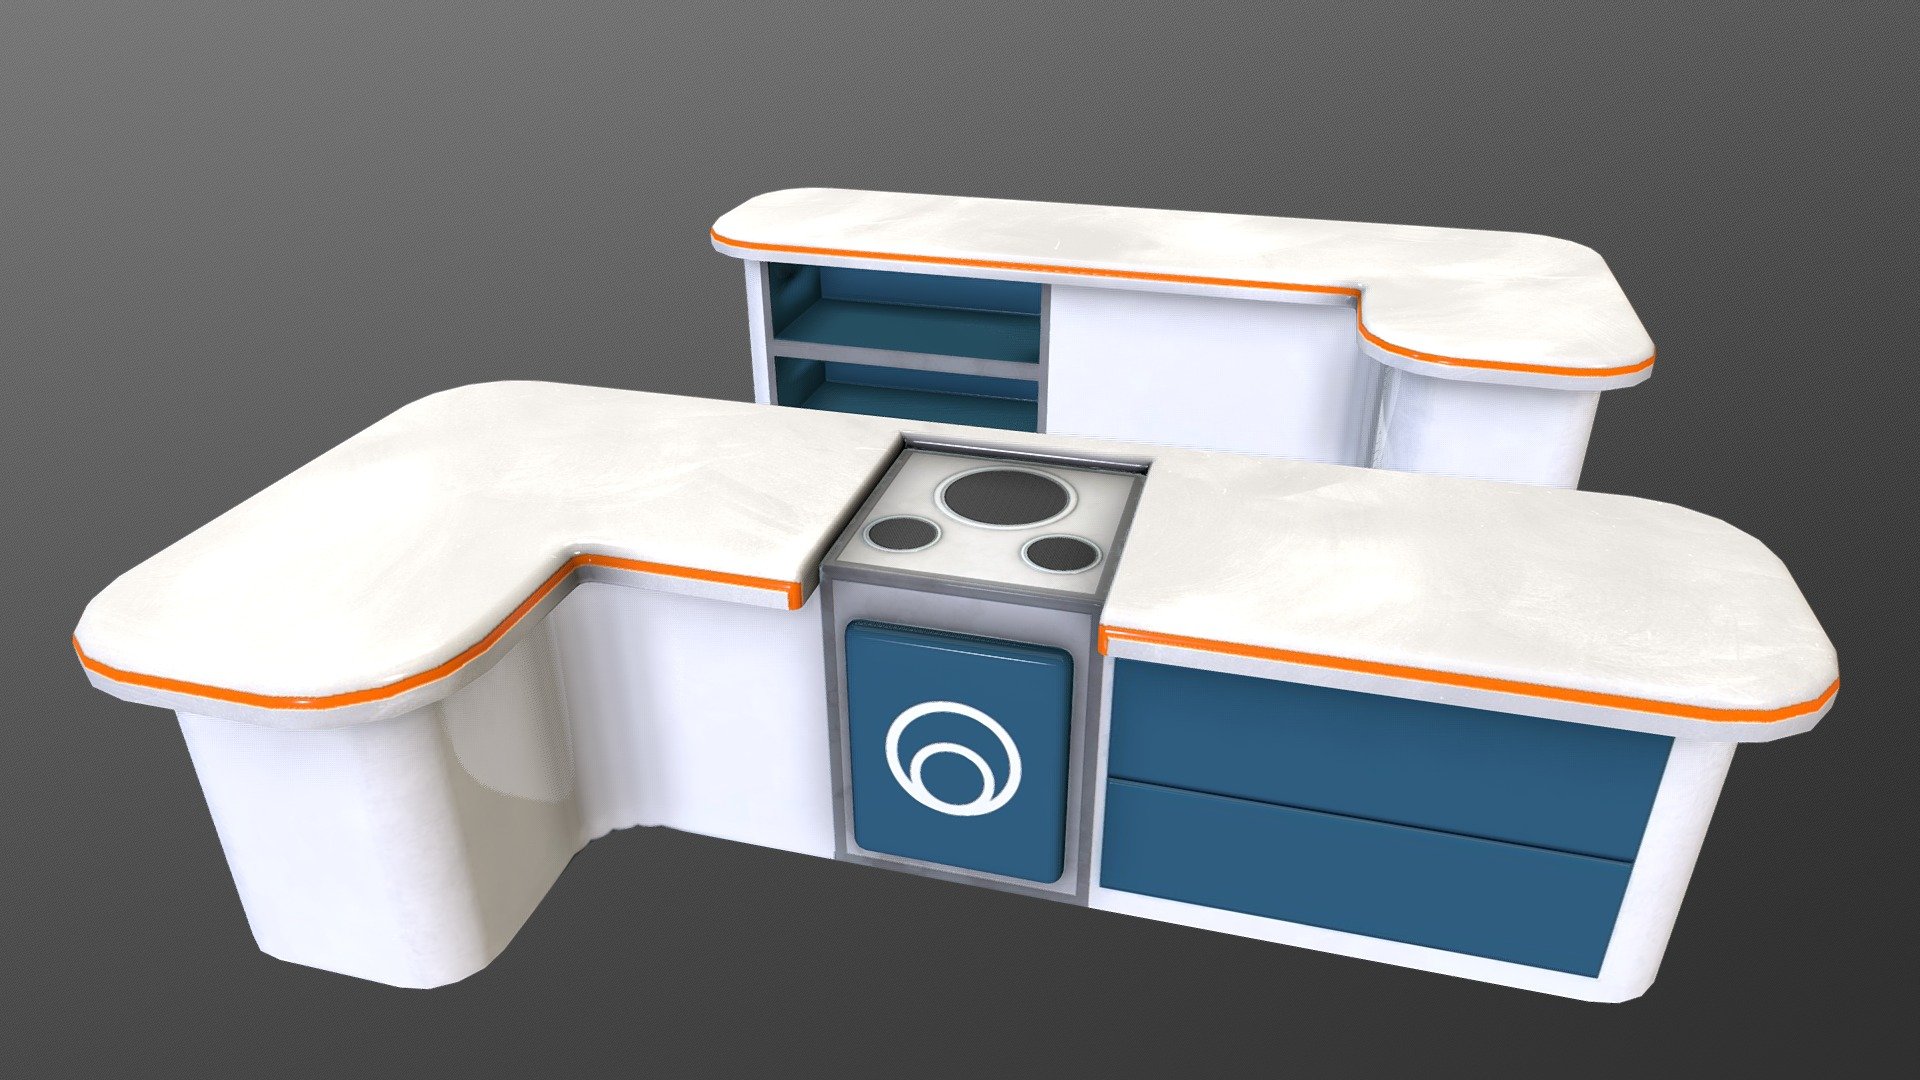 Diner Couters asset made for Project RoZoSho 2018 - Modern Kitchen counter - 3D model by RoyalGh0sts (@JelleHuisInTVeld) 3d model